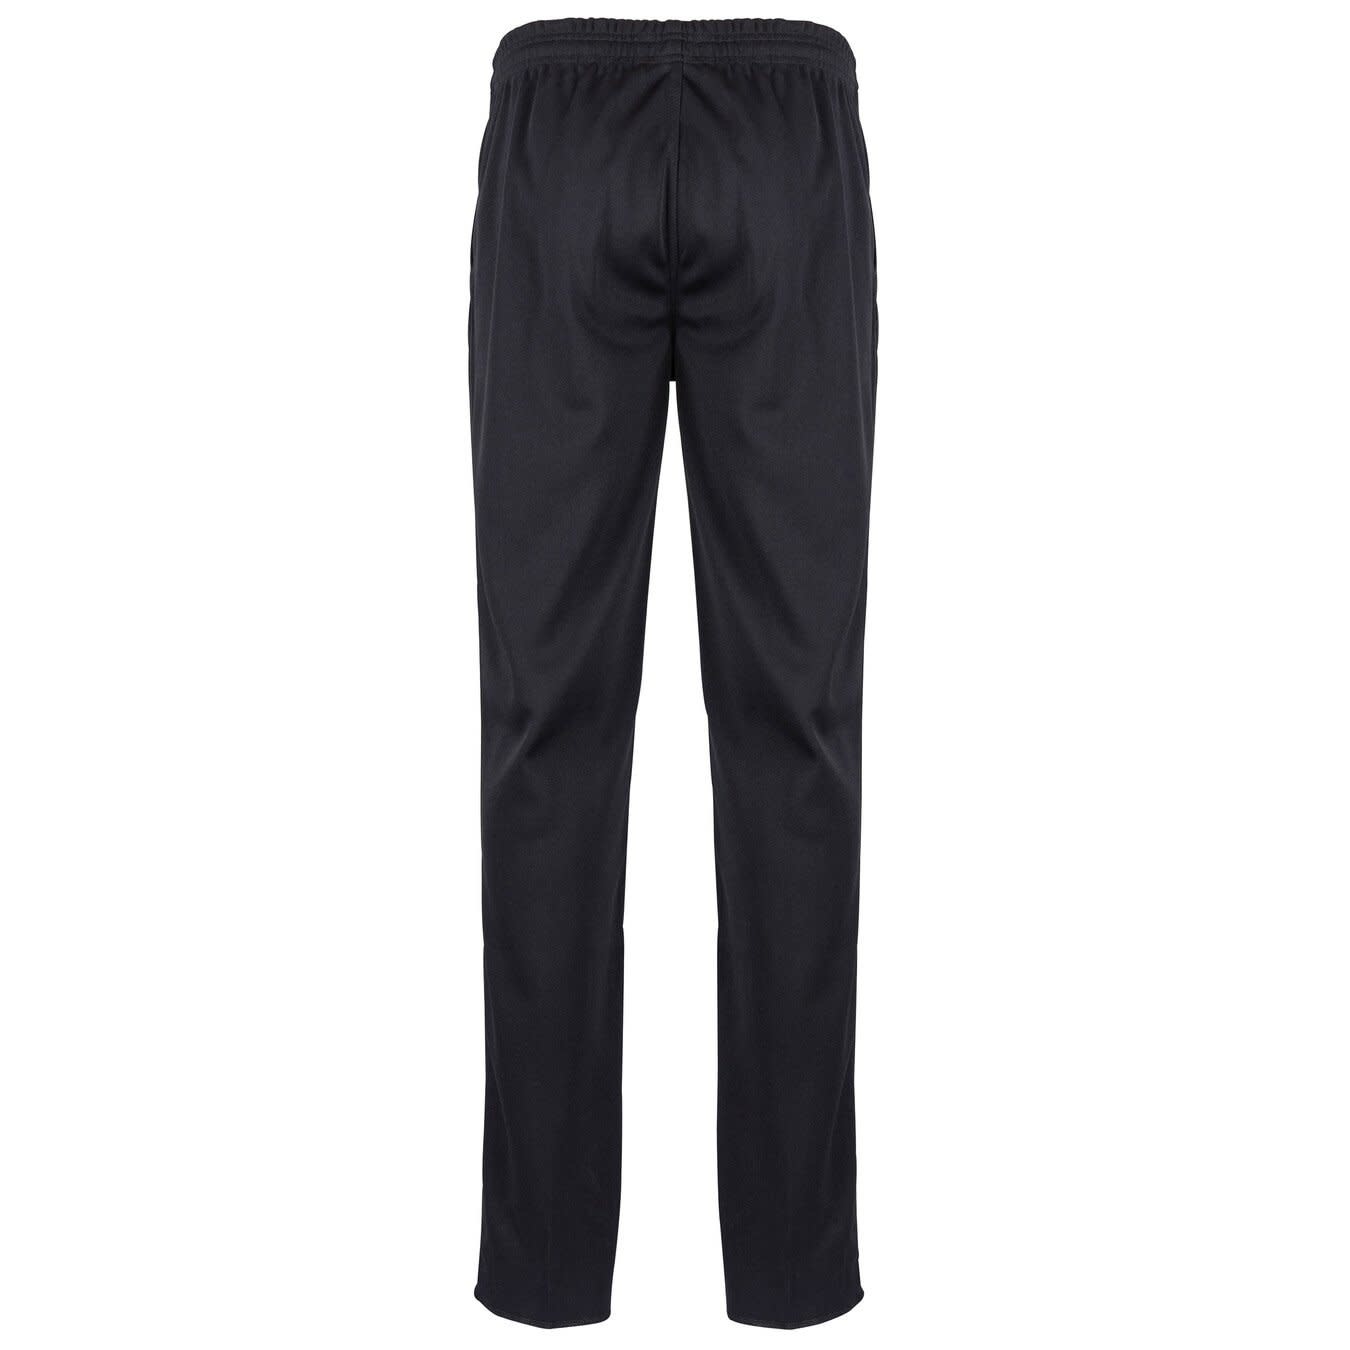 Unbranded junior cricket trousers